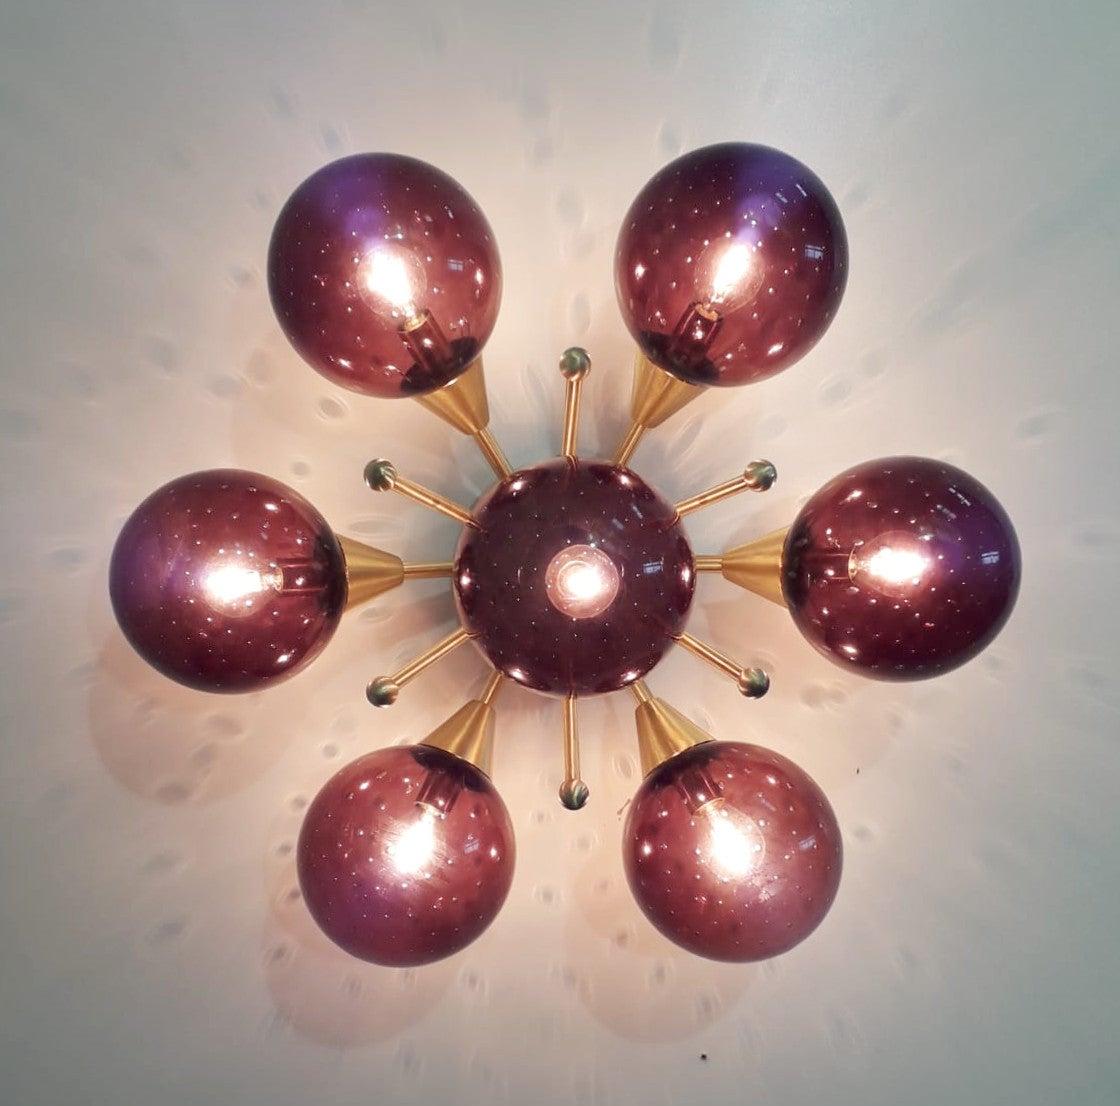 Italian flush mount with Murano glass globes mounted on solid brass frame 
Designed by Fabio Bergomi / Made in Italy 7 lights / E12 or E14 type / max 40W each 
Diameter: 24 inches / Height: 12 inches 
Order only / This item ships from Italy 
Order